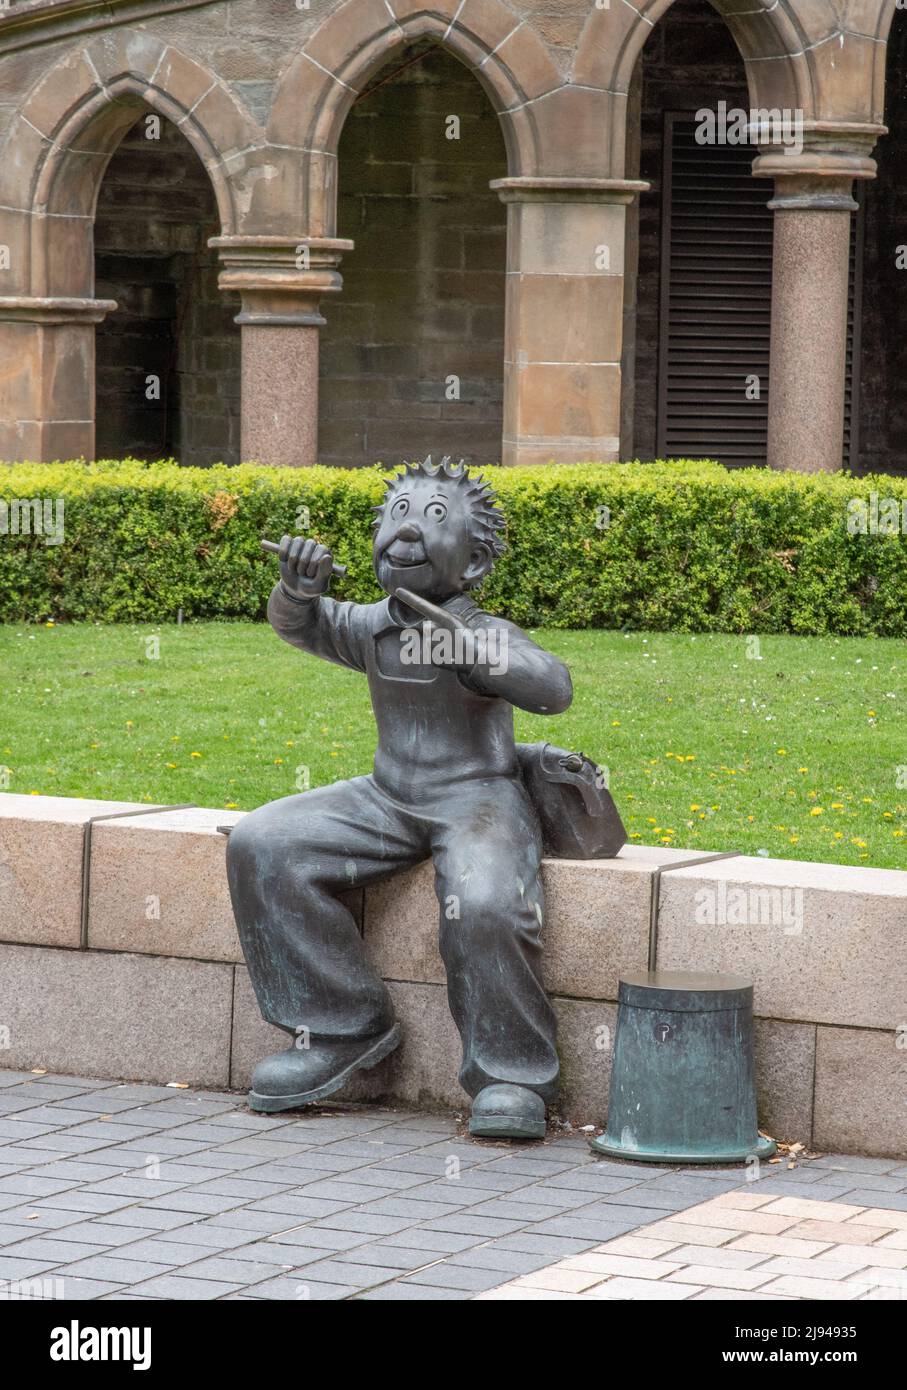 Sculpture of Oor Wullie outside the McManus Gallery in Dundee Stock Photo